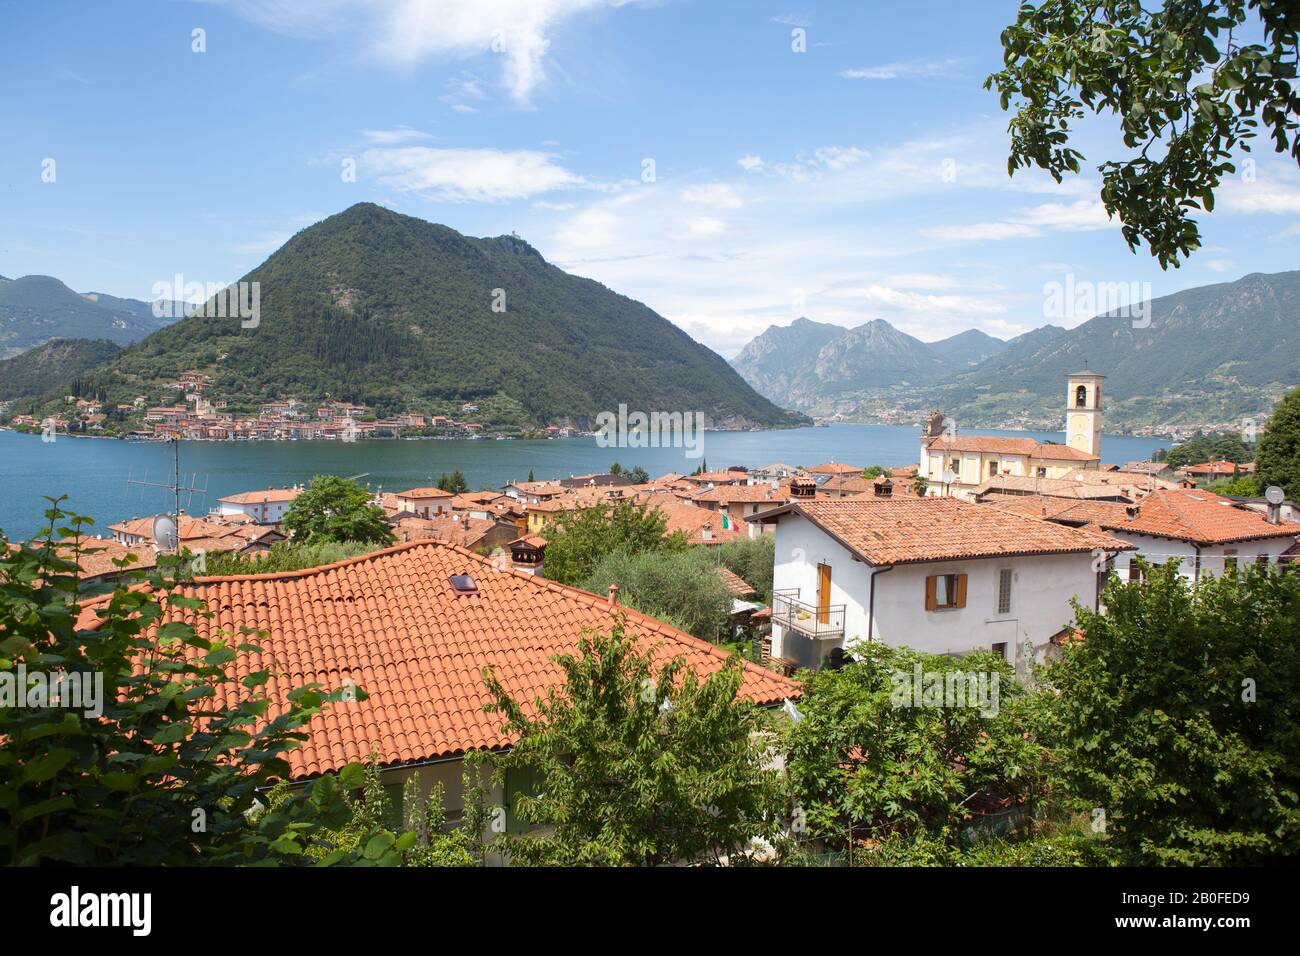 Sulzano, Iseo Lake, Italie Banque D'Images